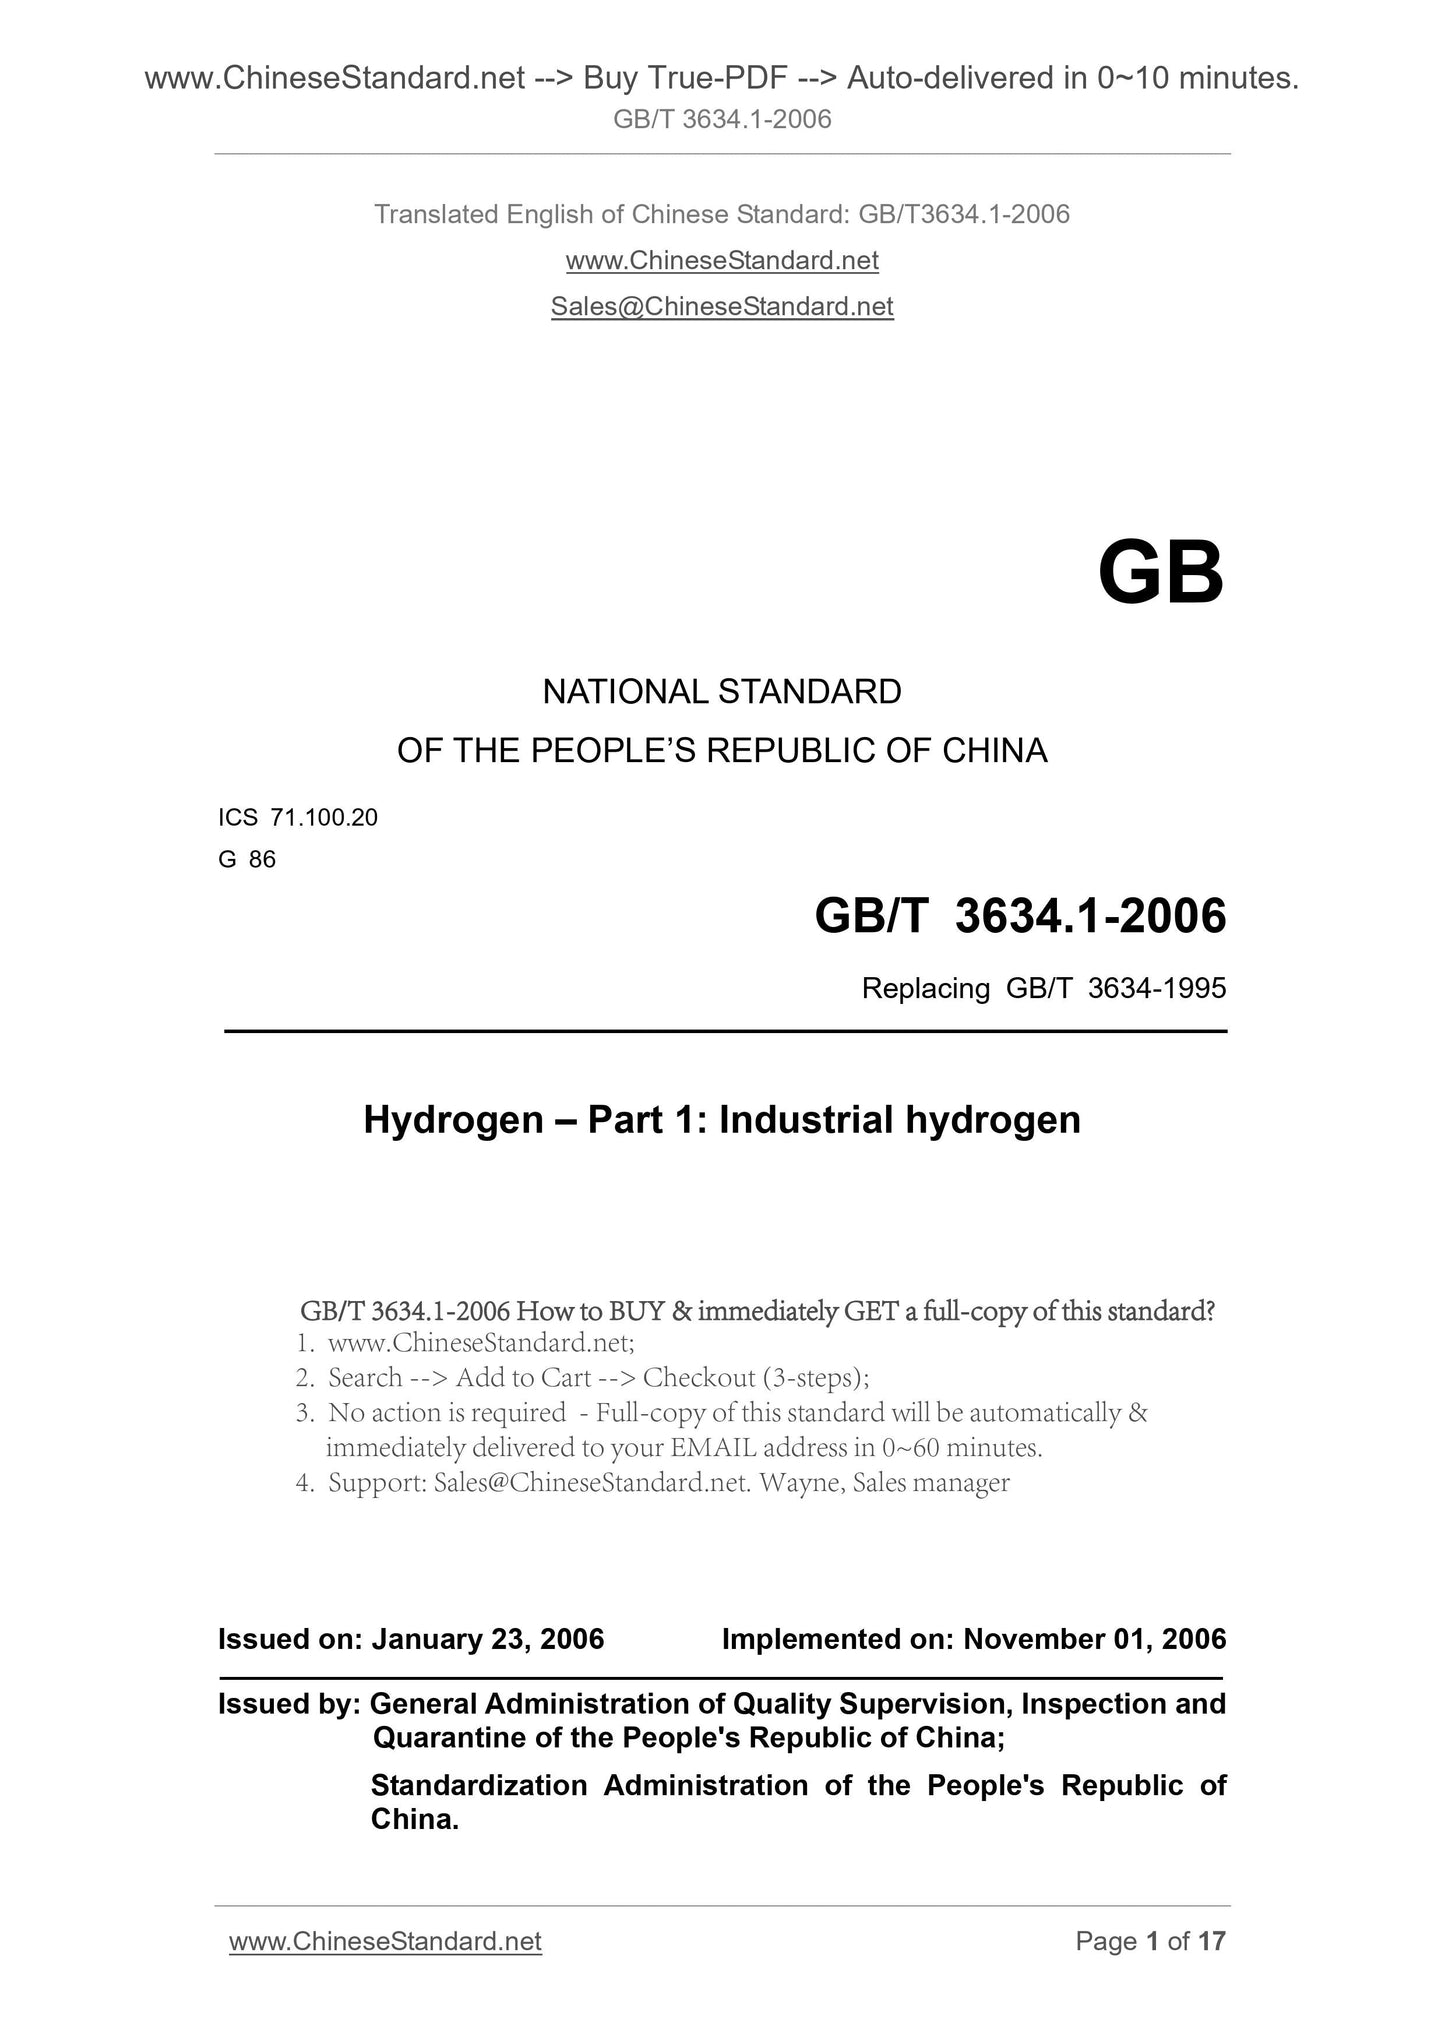 GB/T 3634.1-2006 Page 1